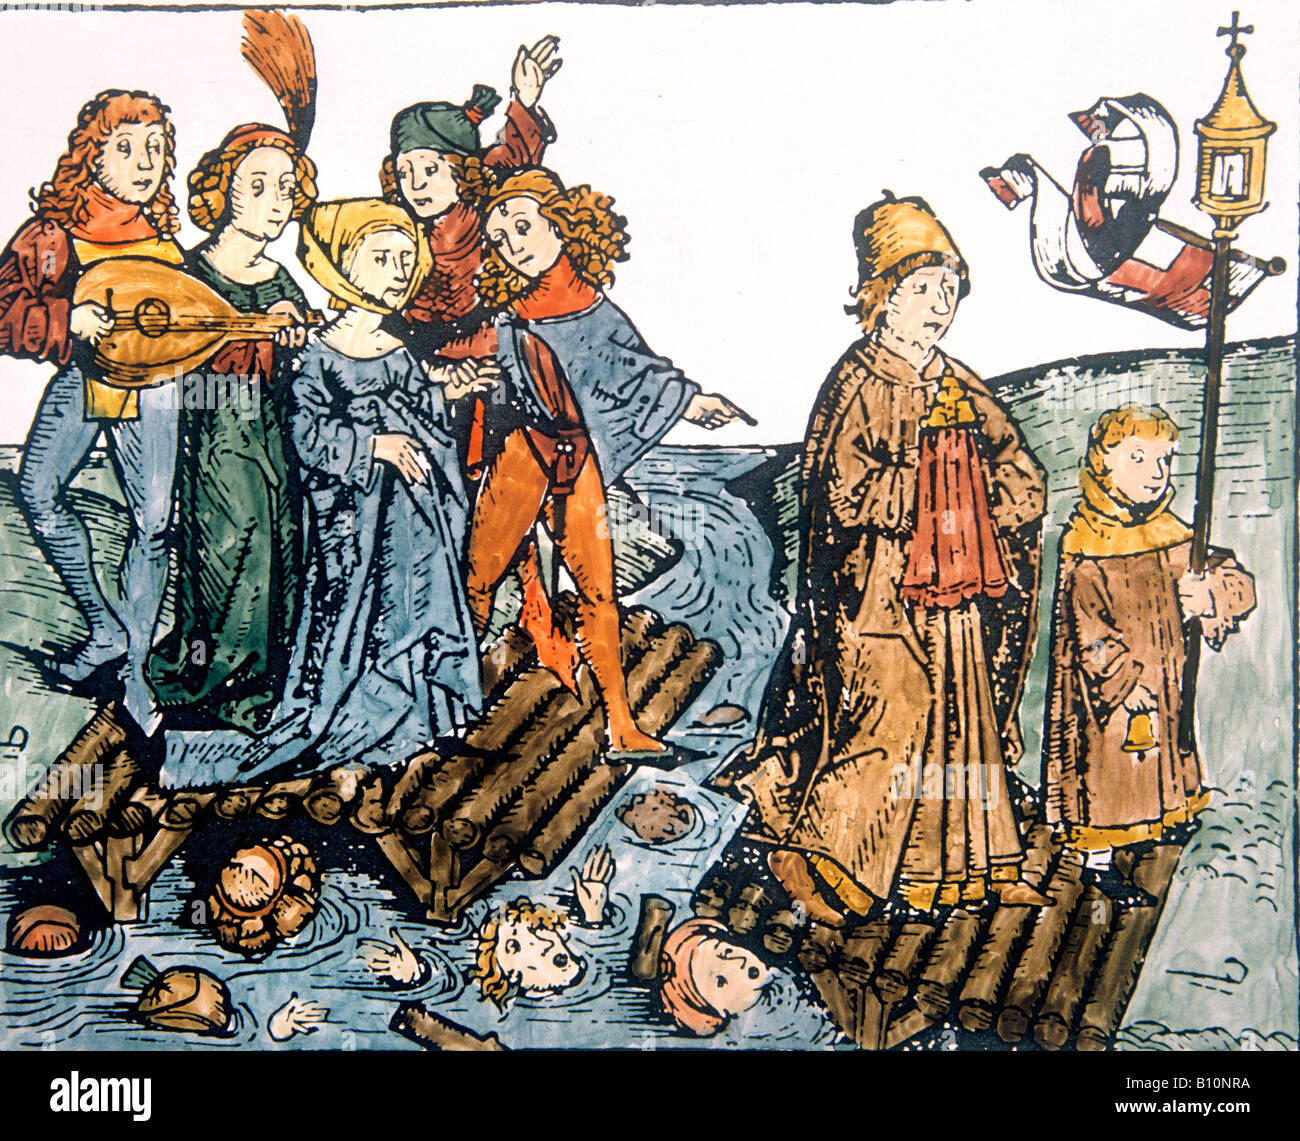 Young people dancing. Ignoring priest. The bridge collapses. Medieval engraving. Stock Photo